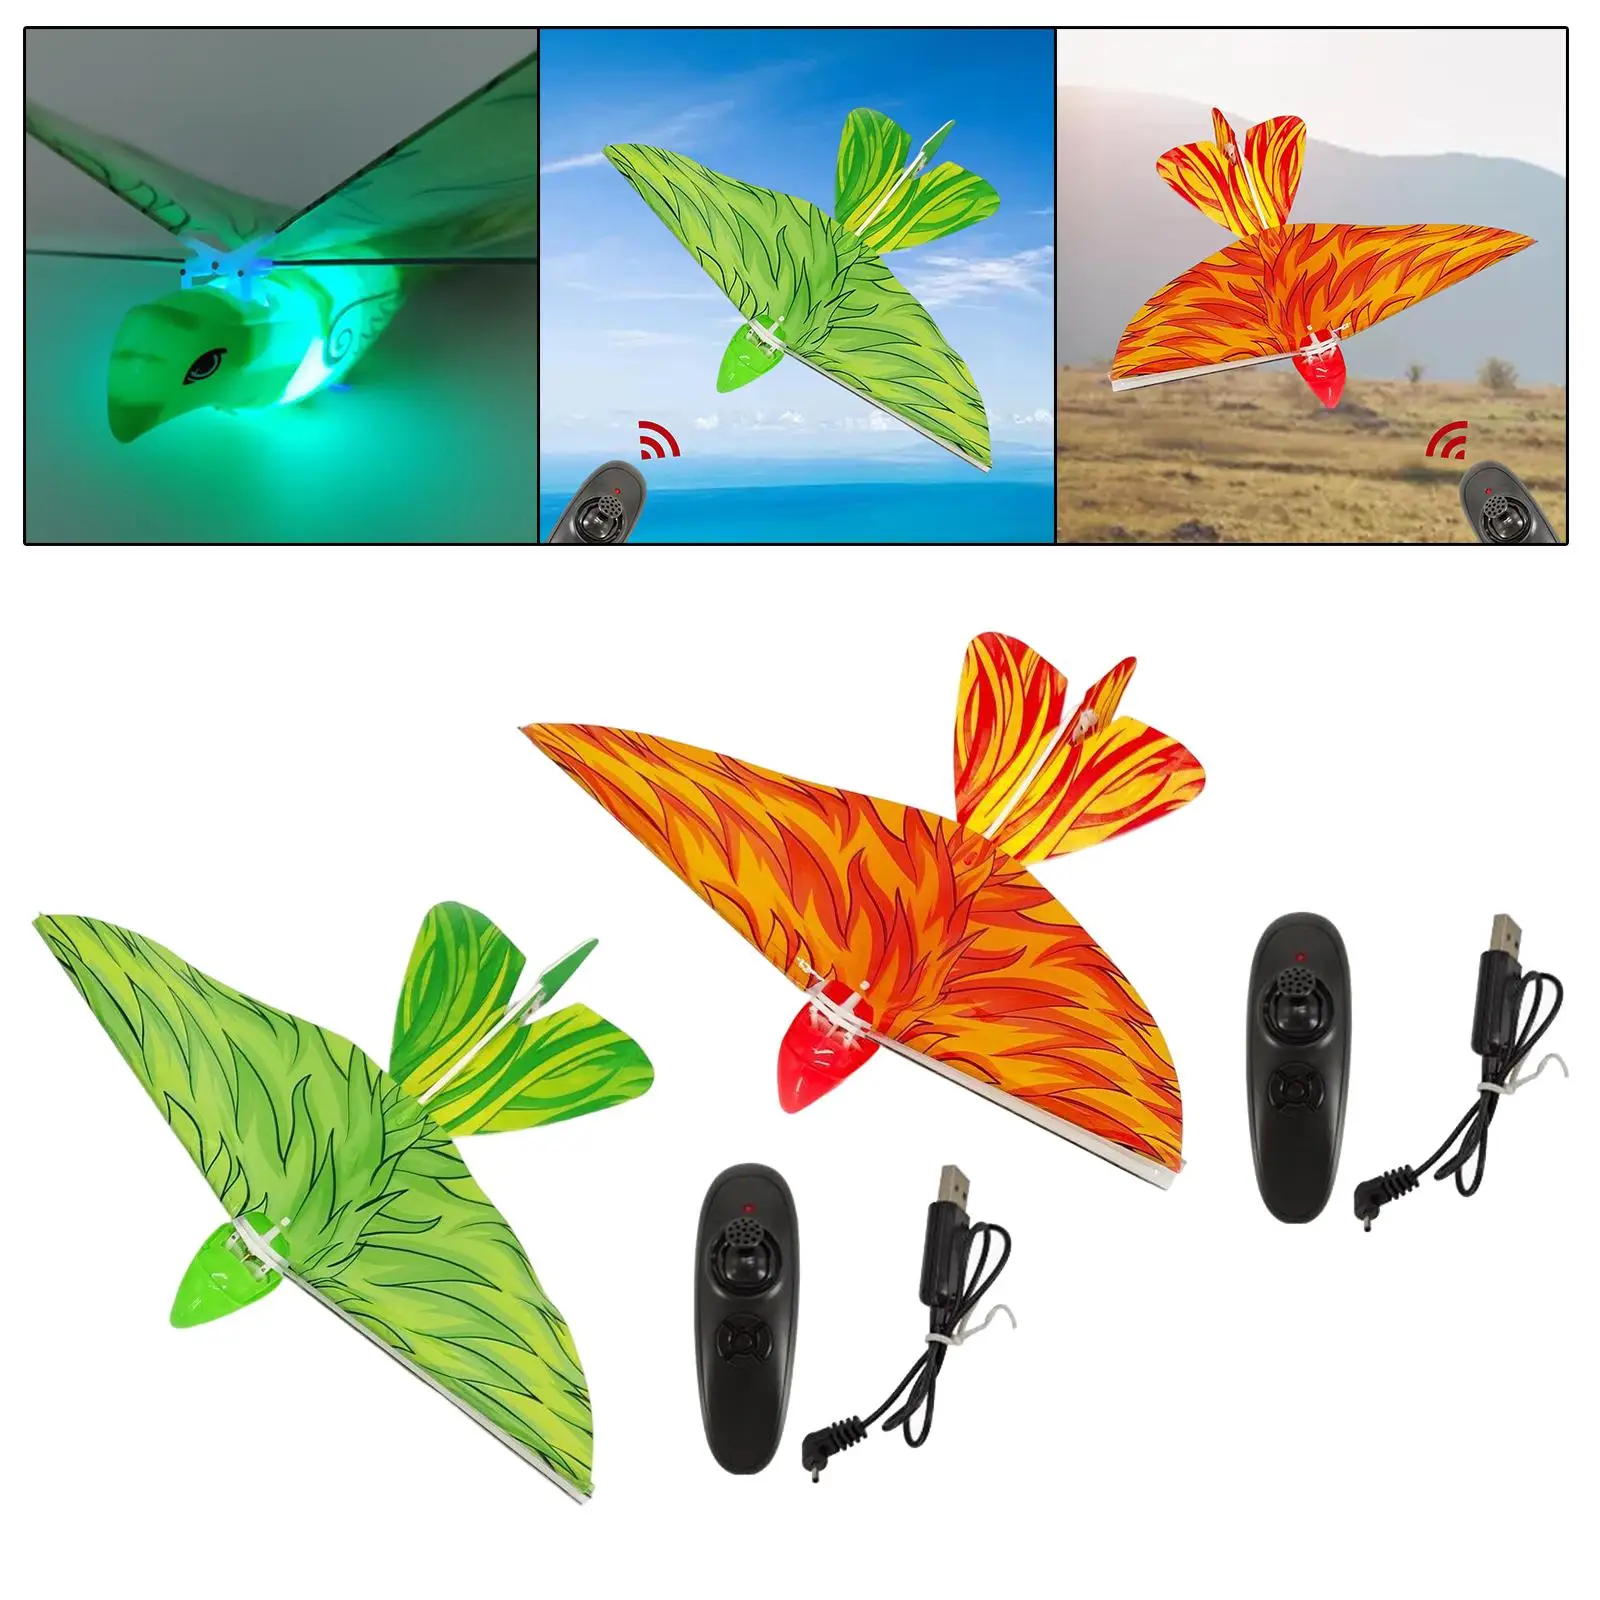 Remote Control Flying Bird with LED Night Lights up/Down Hover Altitude Hold